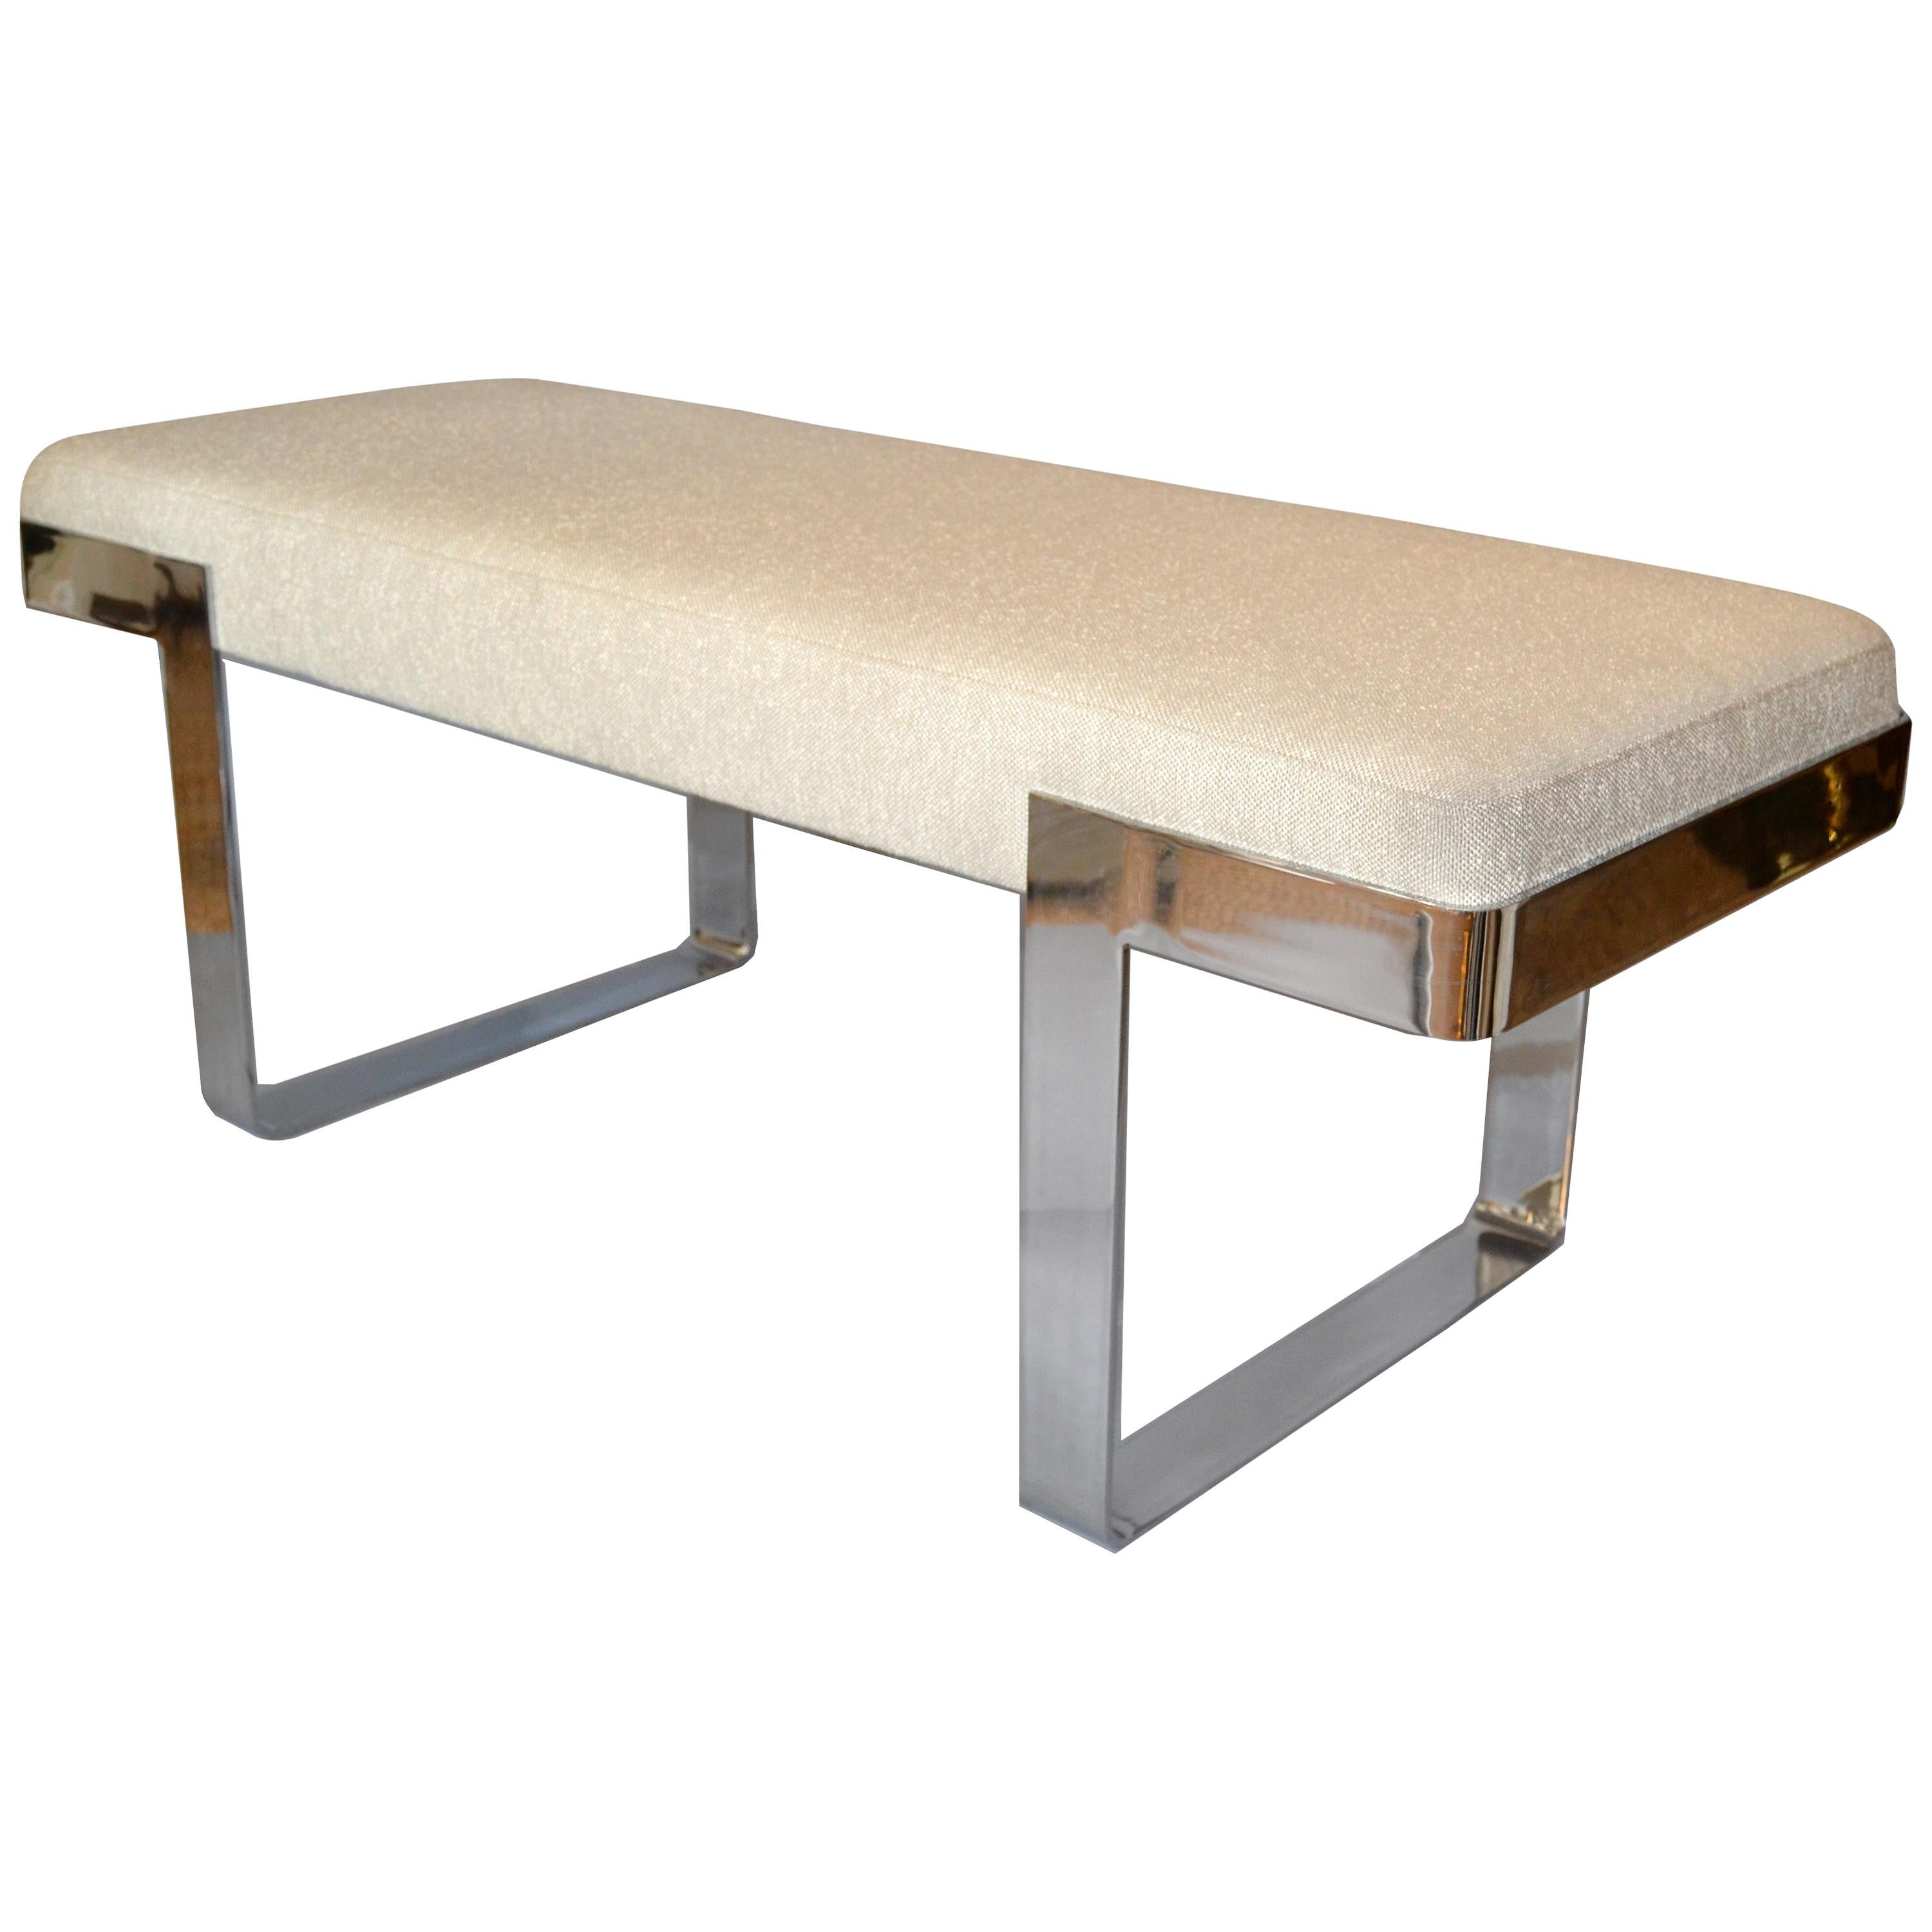 1 of 2 Milo Baughman Benches Linen Fabric in Beige on Steel Base Pace Collection